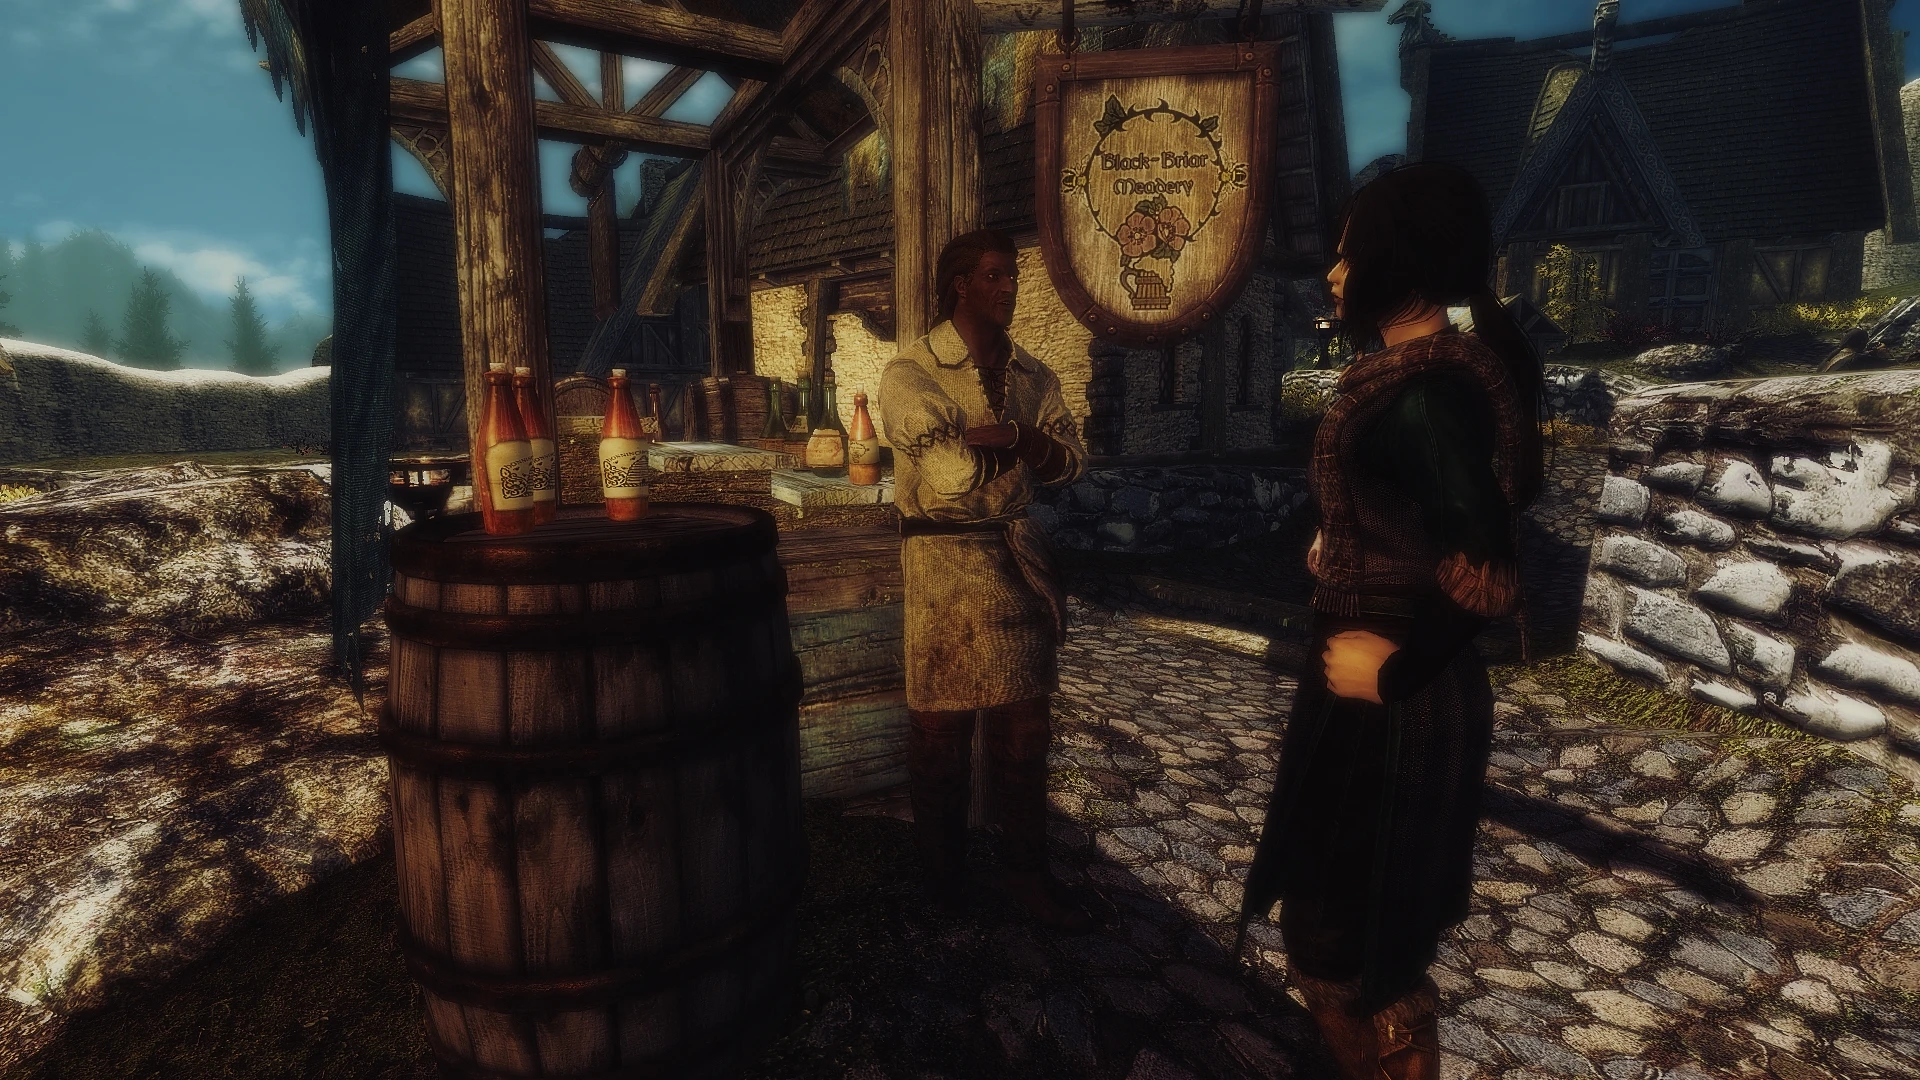 I can get this mead 5 septims cheaper in Markarth. 